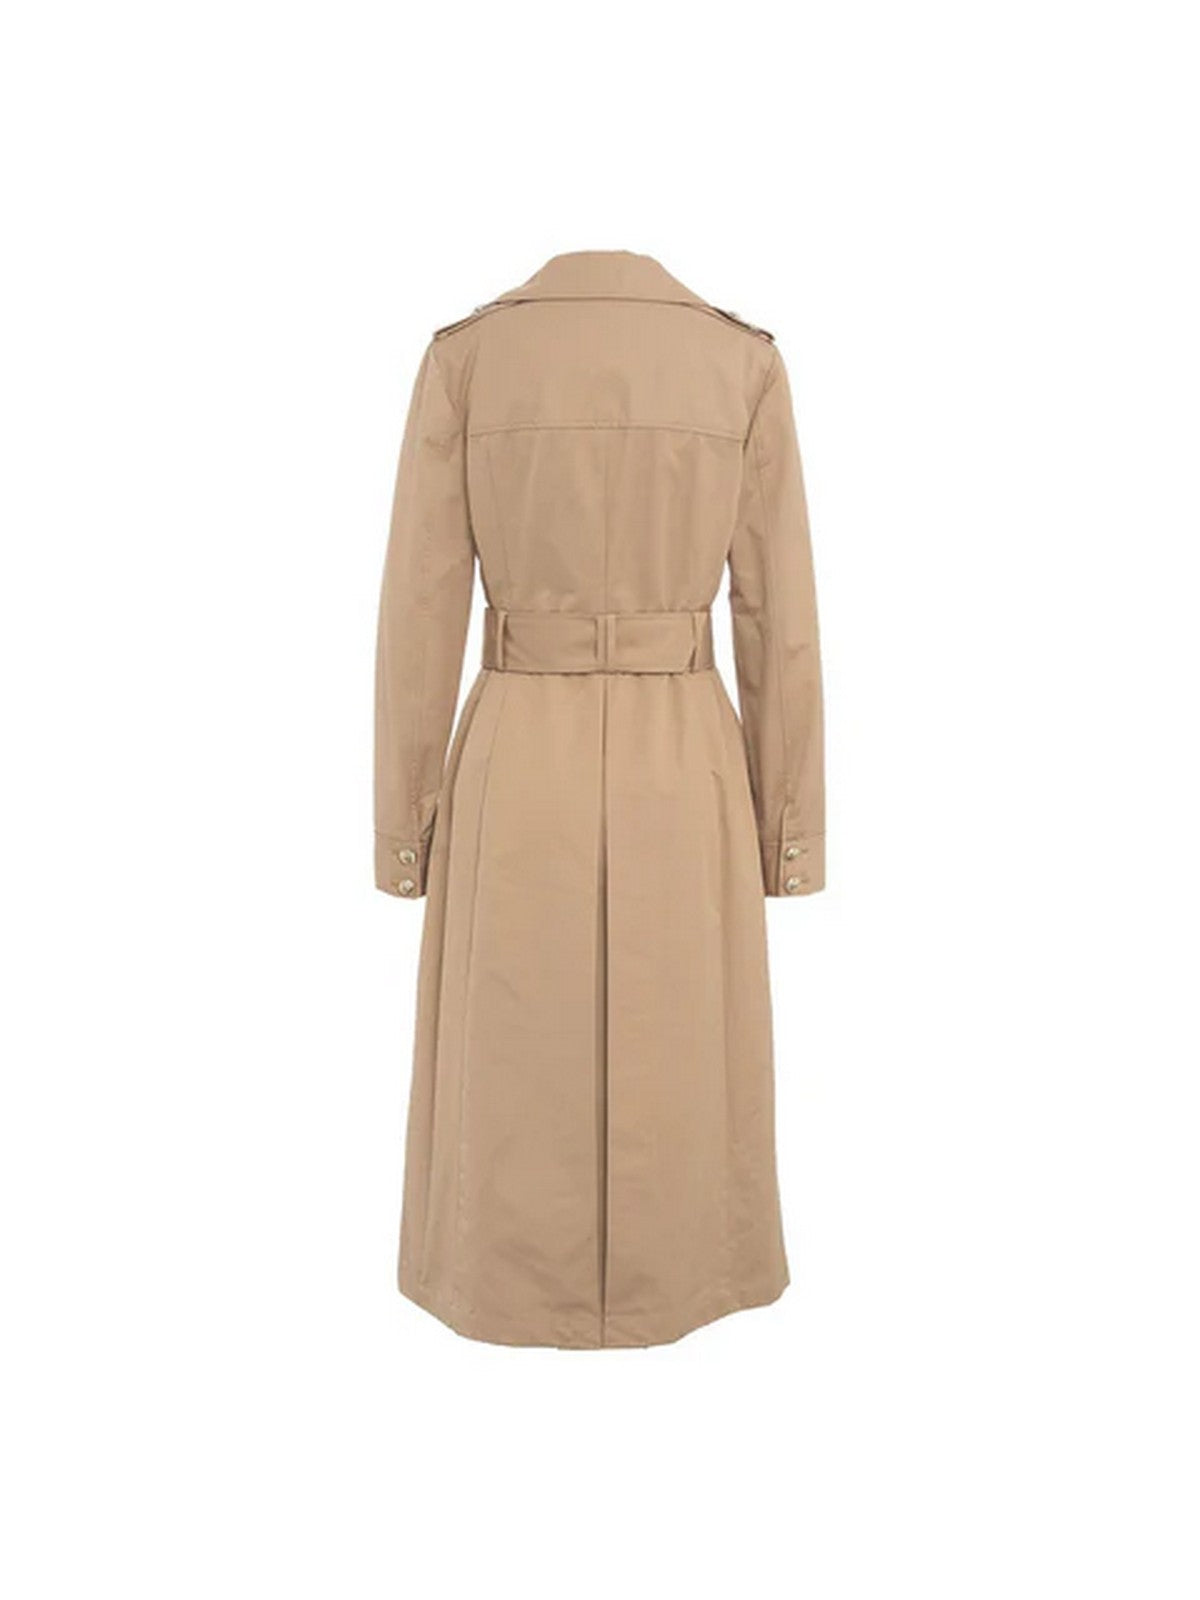 MARCIANO Trench-coat Dalila pour femme 4YGL06 7118A G1K9 Beige